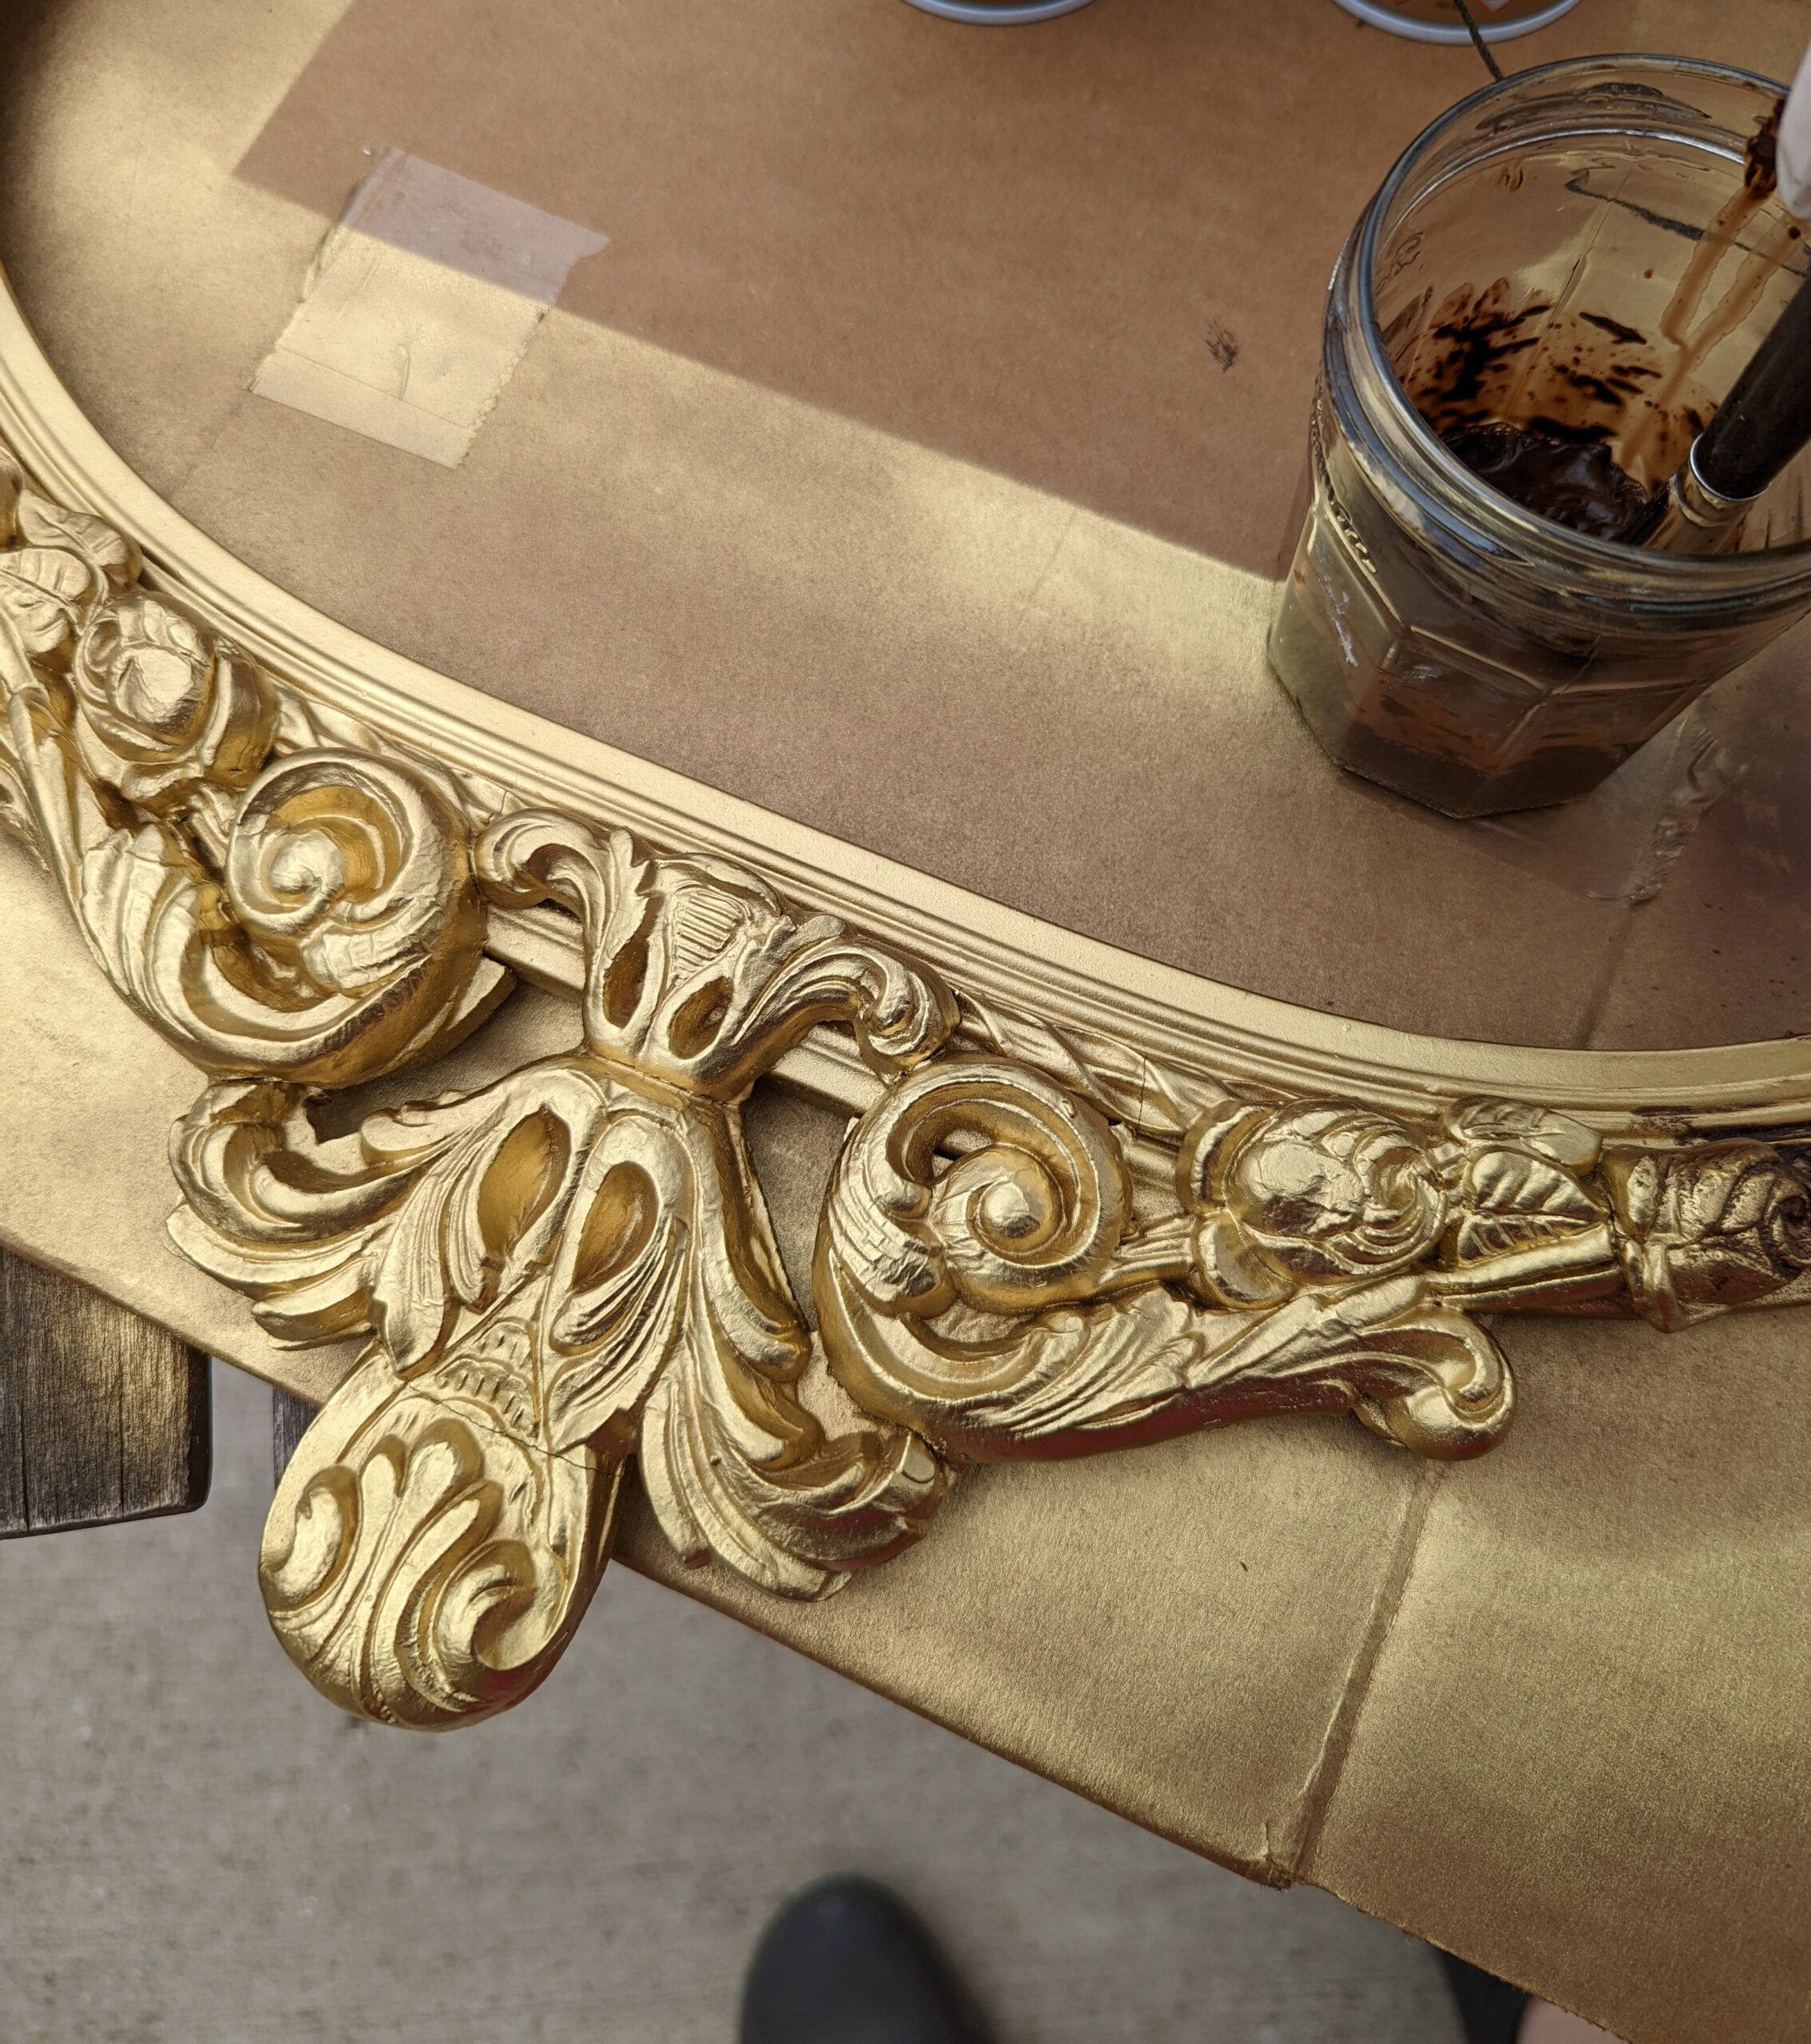 A closeup image of an antique frame being repainting with an antique gold finish.